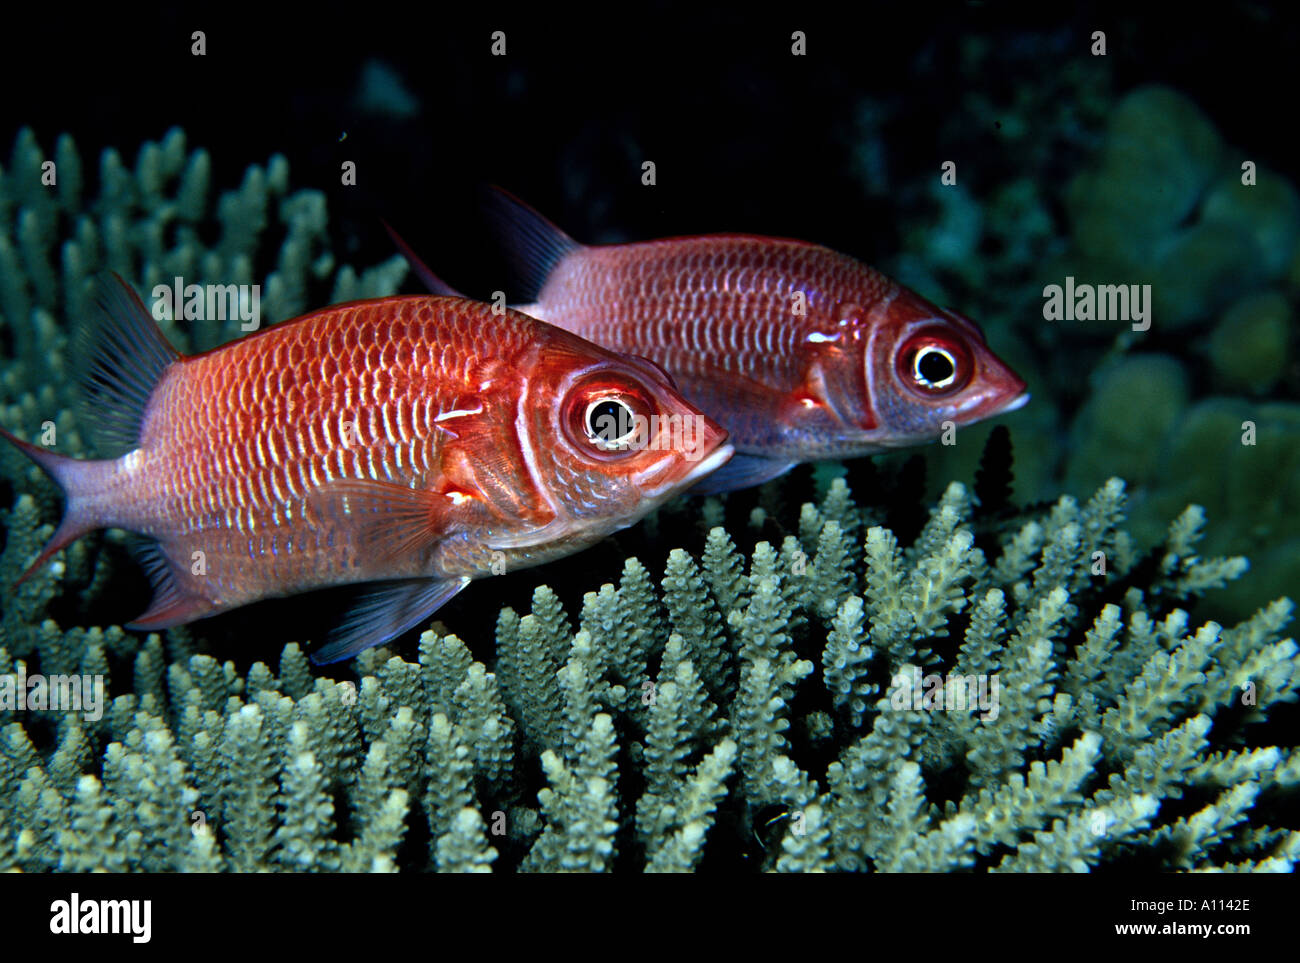 VIVIDLY RED TAILSPOT SQUIRRELFISH Sargocentron caudimaculatum HOVERS ABOVESOME STONY CORALS ON A REEF IN PAPUA NEW GUINEA Stock Photo